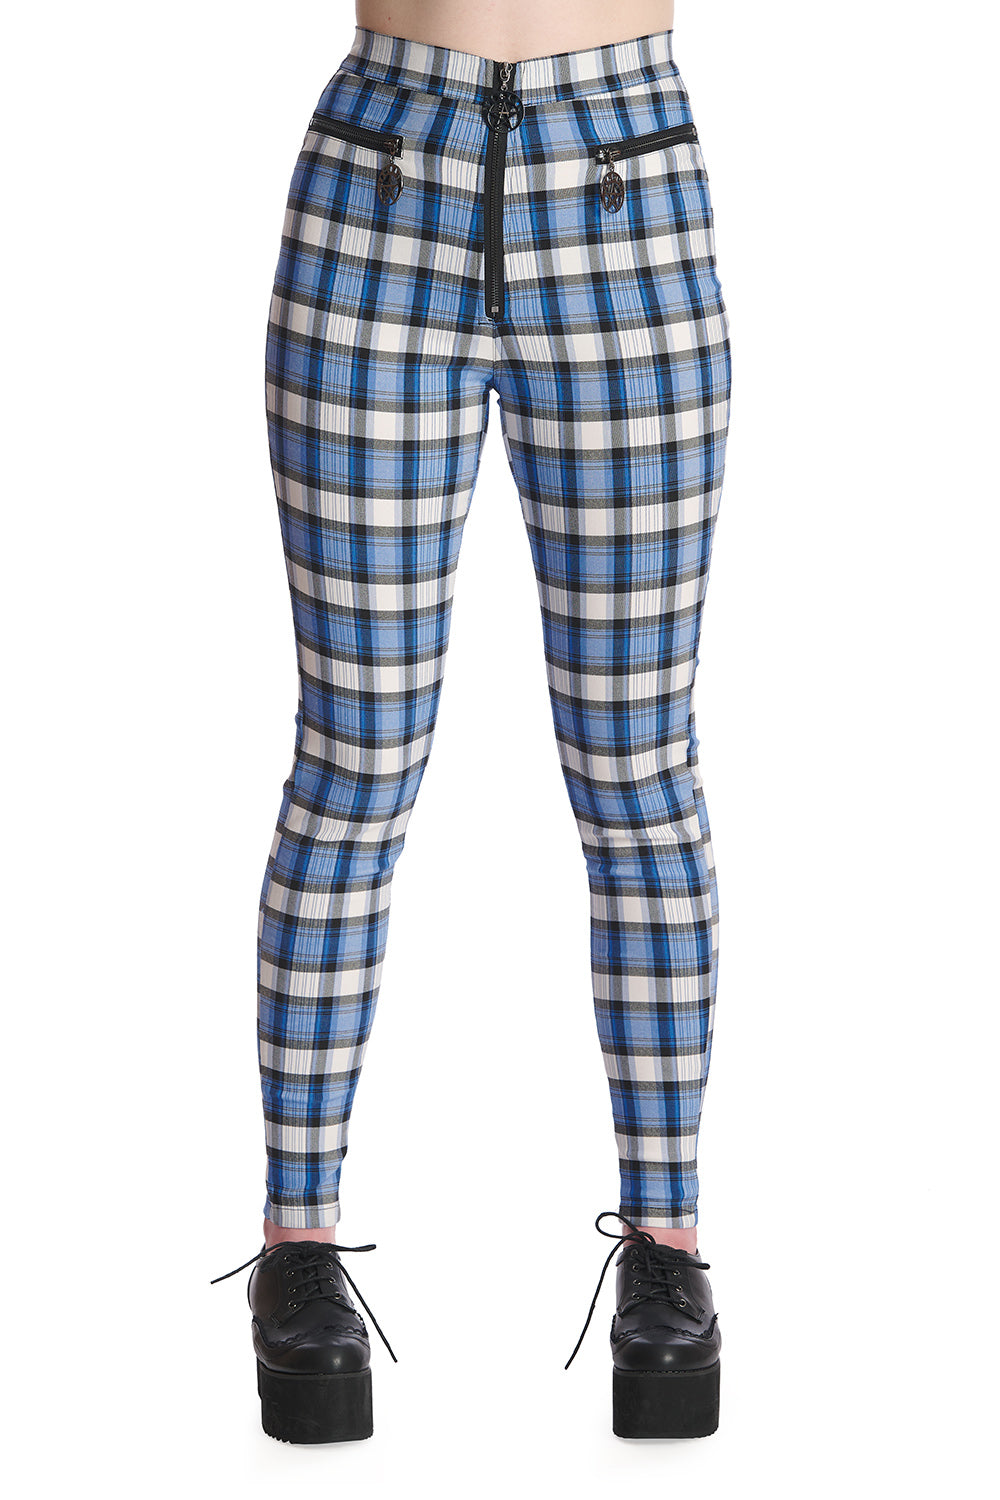 High waisted blue and white tartan trousers with front zip and pentagram pendants 